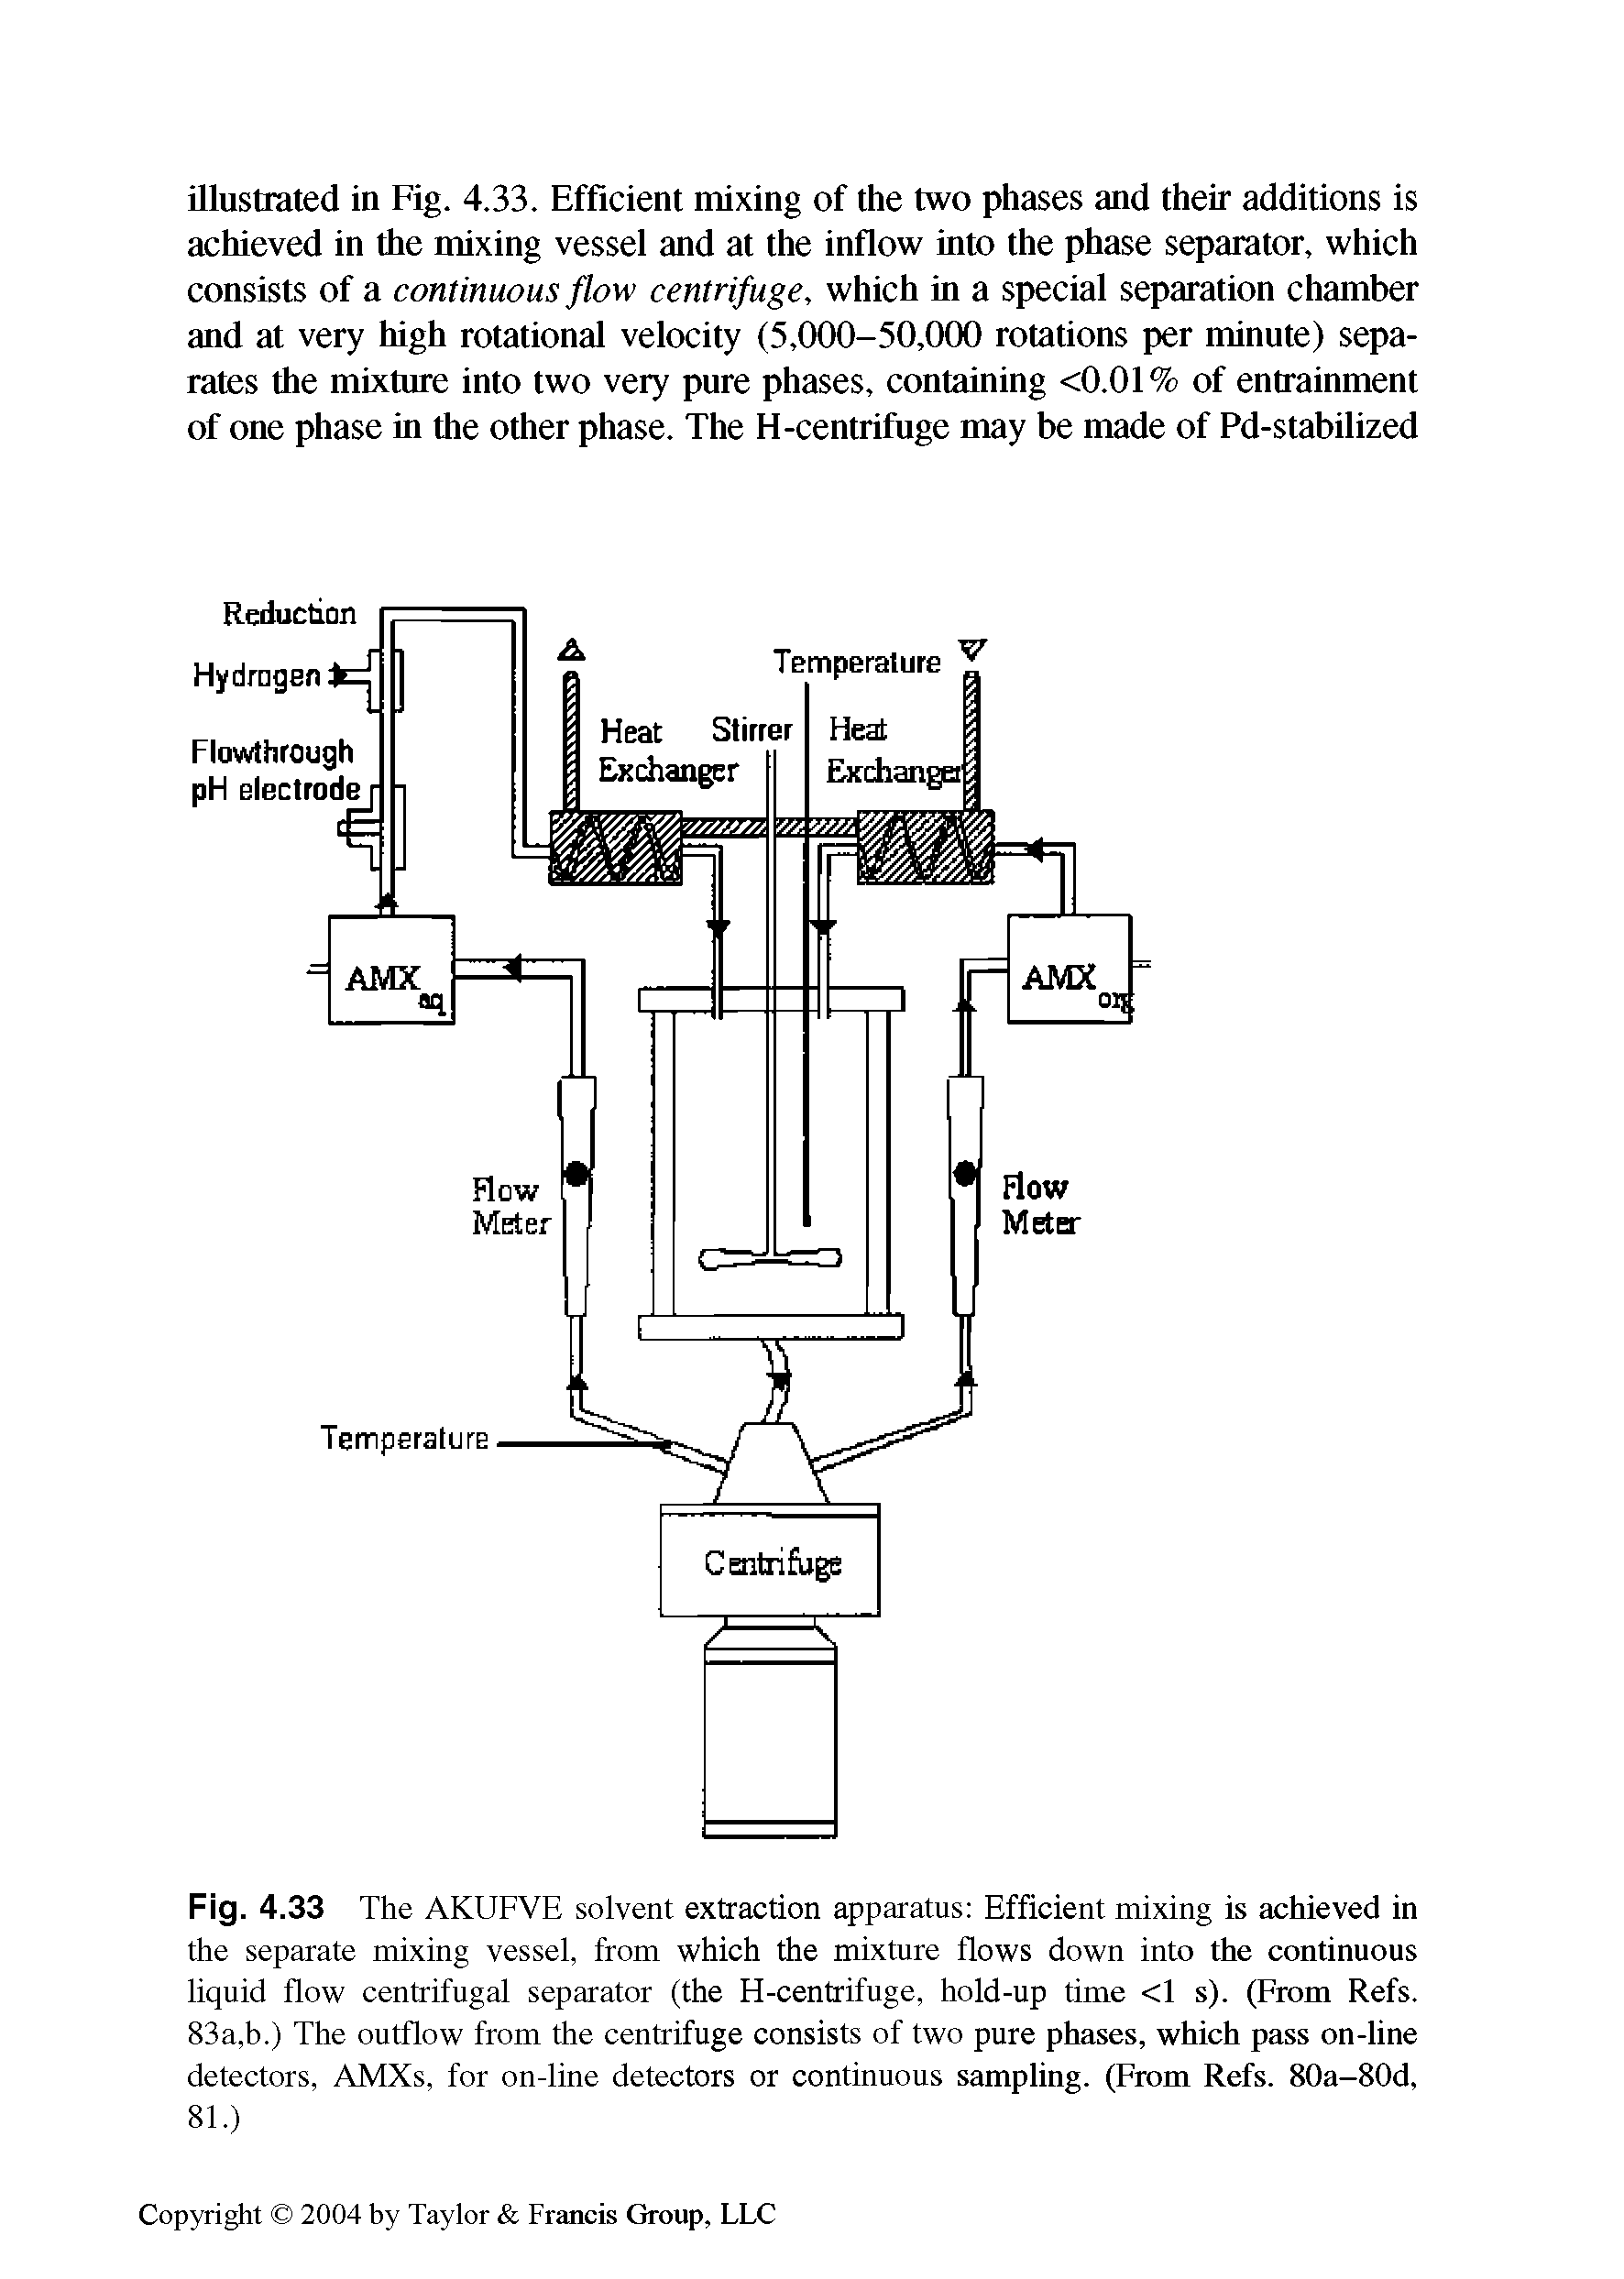 Fig. 4. 33 The AKUFVE solvent extraction apparatus Efficient mixing is achieved in the separate mixing vessel, from which the mixture flows down into the continuous liquid flow centrifugal separator (the H-centrifuge, hold-up time <1 s). (From Refs. 83a,b.) The outflow from the centrifuge consists of two pure phases, which pass on-line detectors, AMXs, for on-line detectors or continuous sampling. (From Refs. 80a-80d, 81.)...